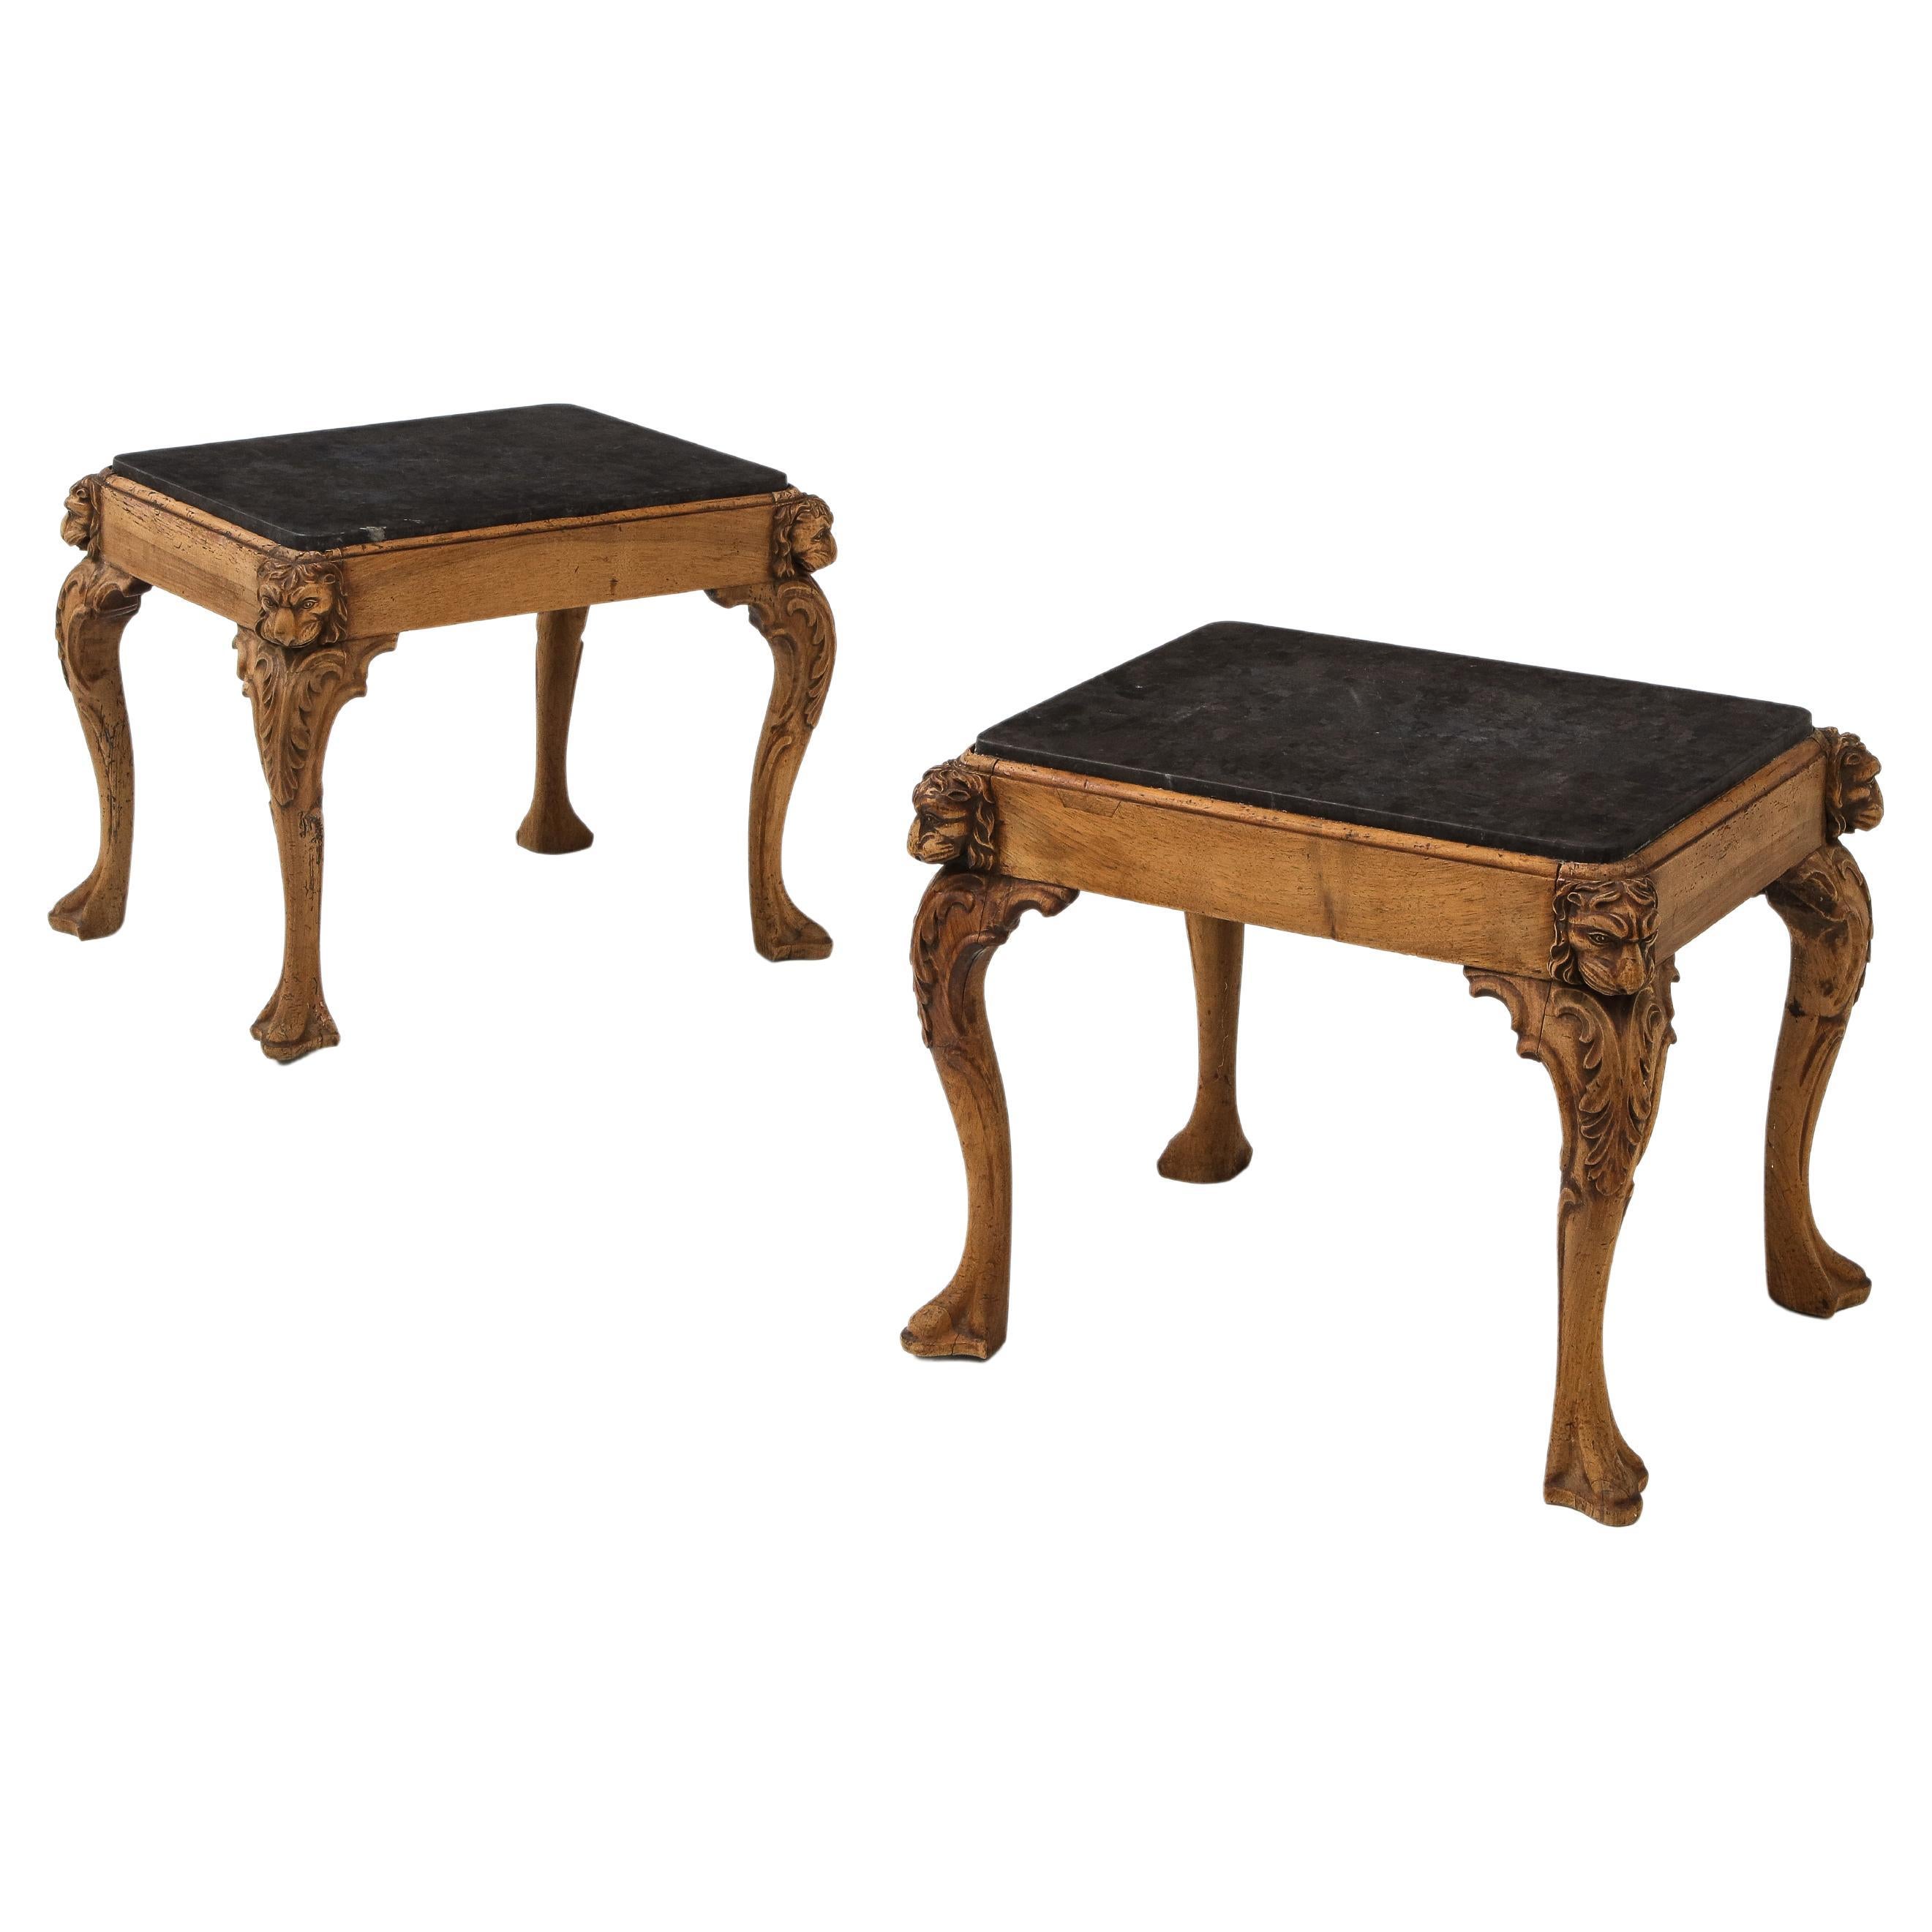 Pair of Queen Anne Style Cabriole Leg Coffee Tables, England, 19th Century